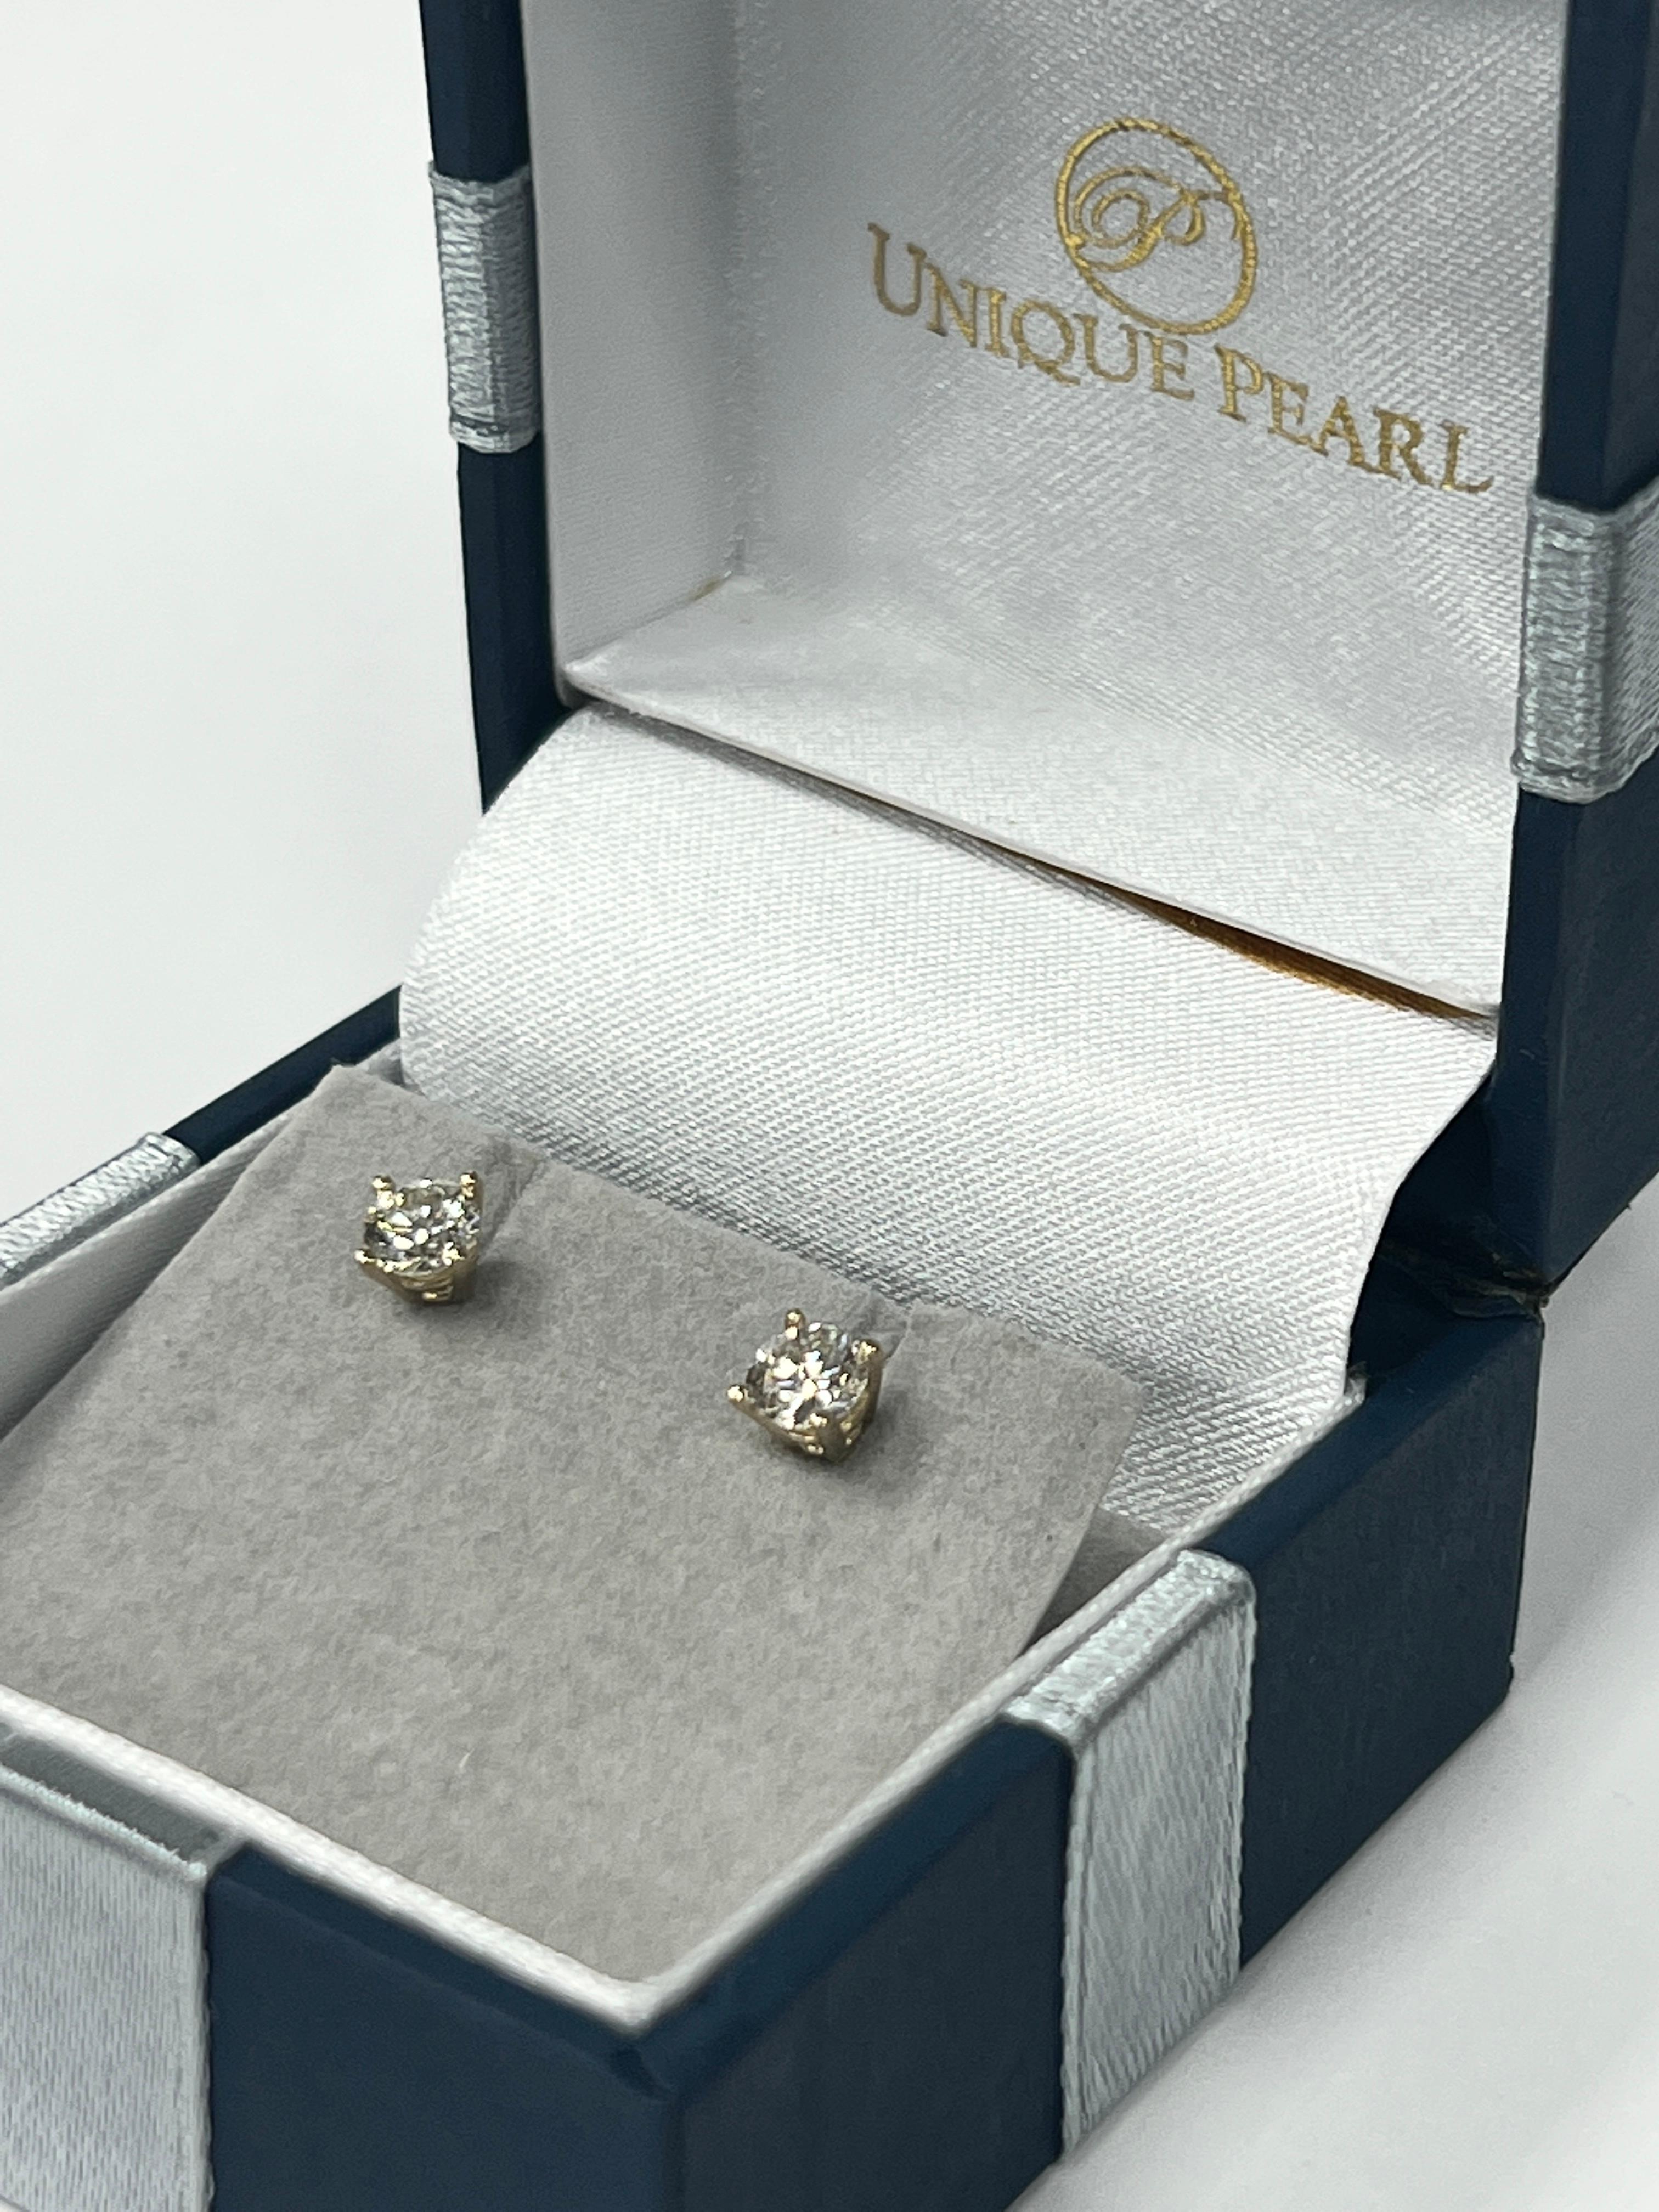 With these exquisite diamond studs, style and glamour are in the spotlight. These studs are set in 14-karat gold. The color of the diamonds is SI. The clarity is VS2-SI1. It is made out of 2 diamonds totaling 0.50 carats (1/2CT). It is set in a